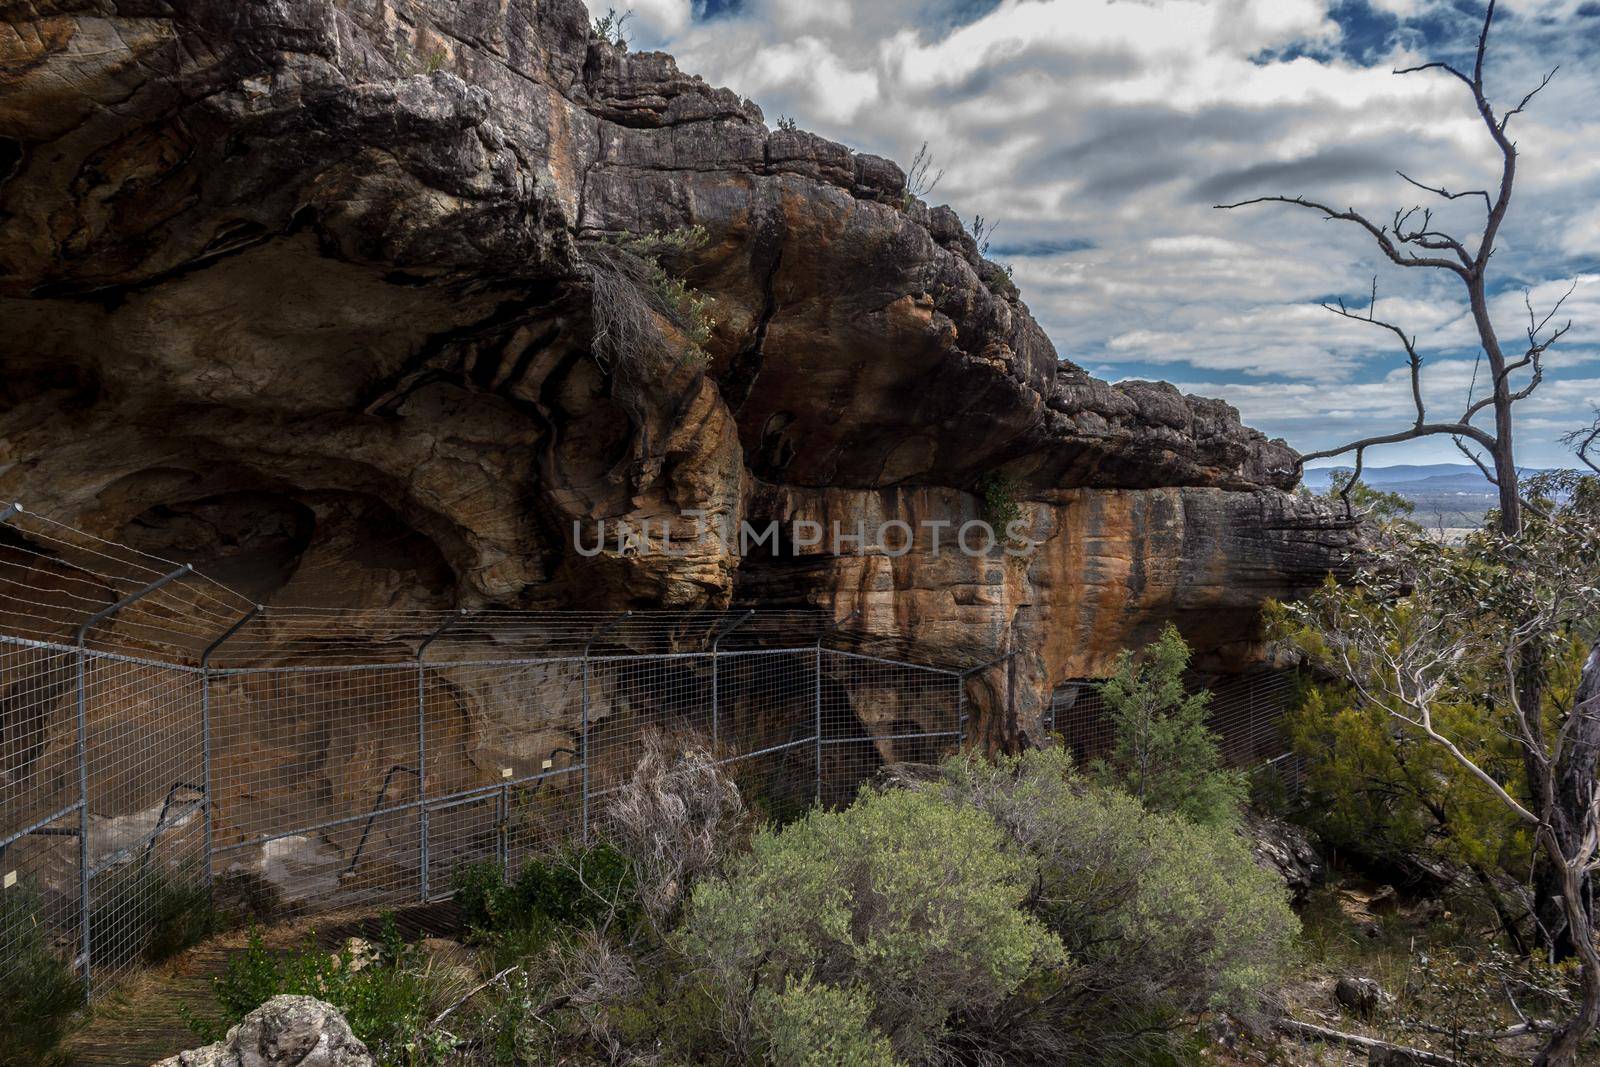 view over a Aboriginal cave, behind a fence, gagrampians National park, australia